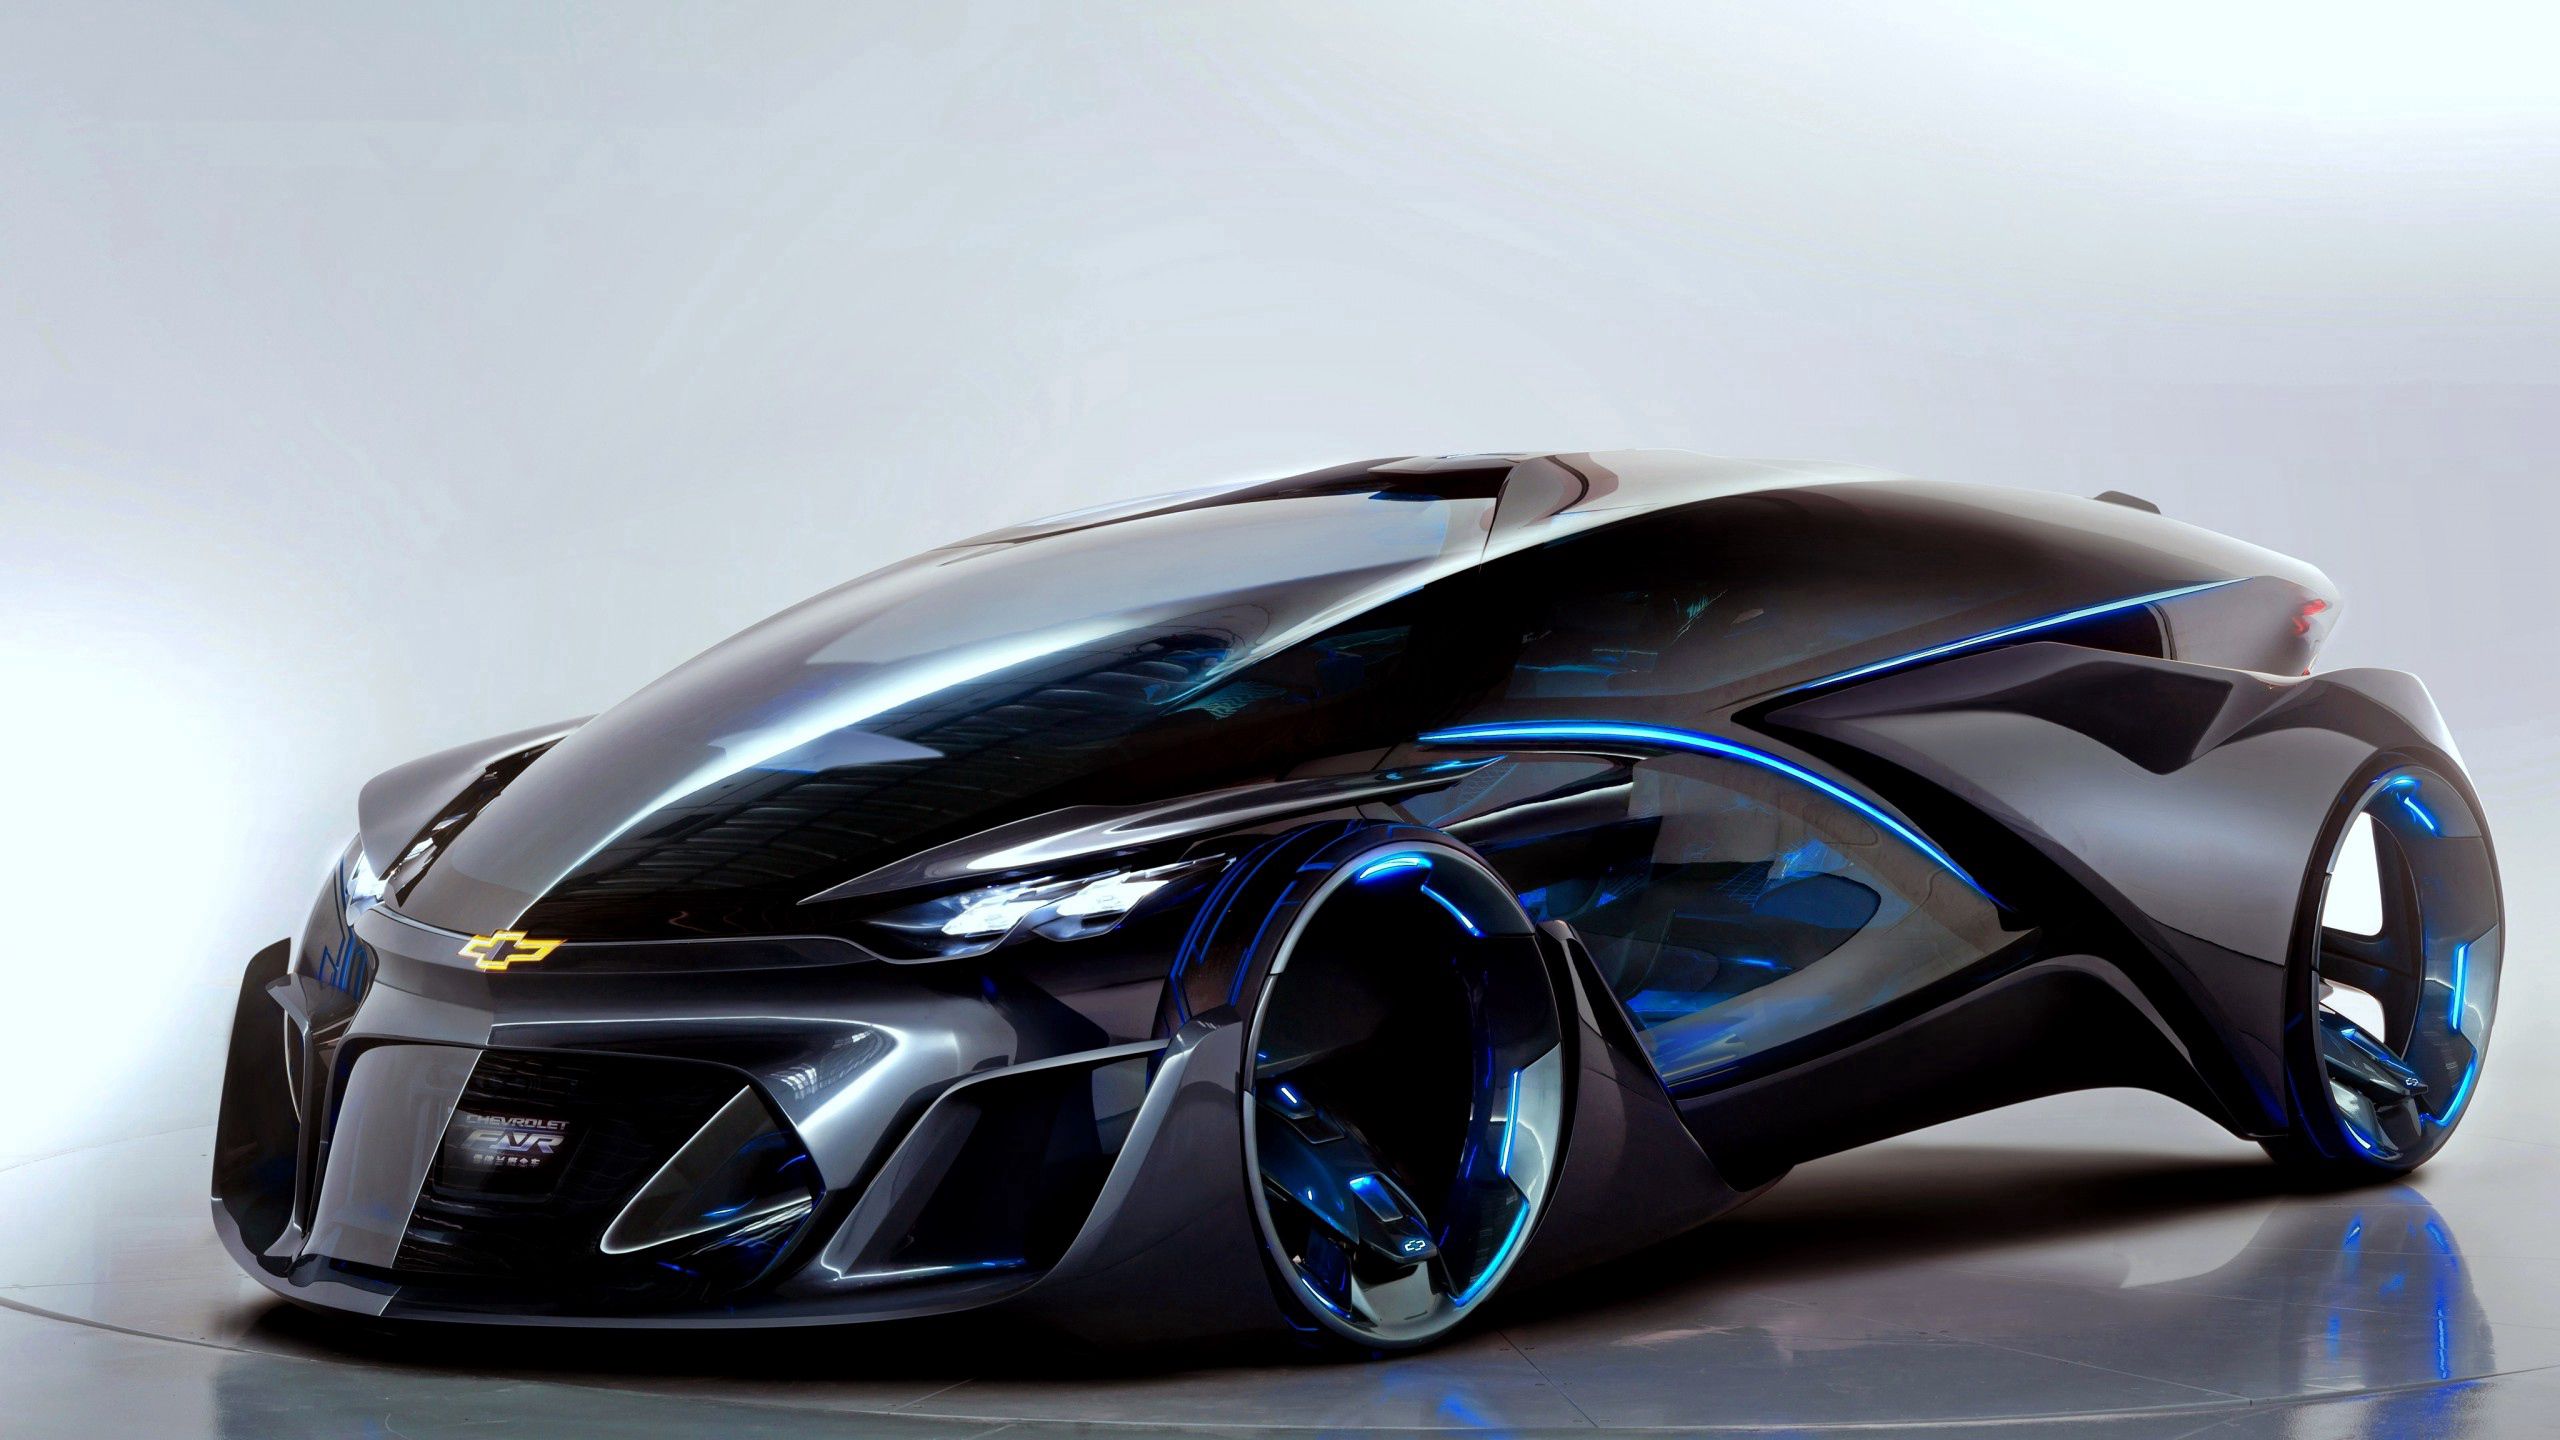 98166 download wallpaper supercar, chevrolet, cars, concept, side view, 2015, fnr screensavers and pictures for free